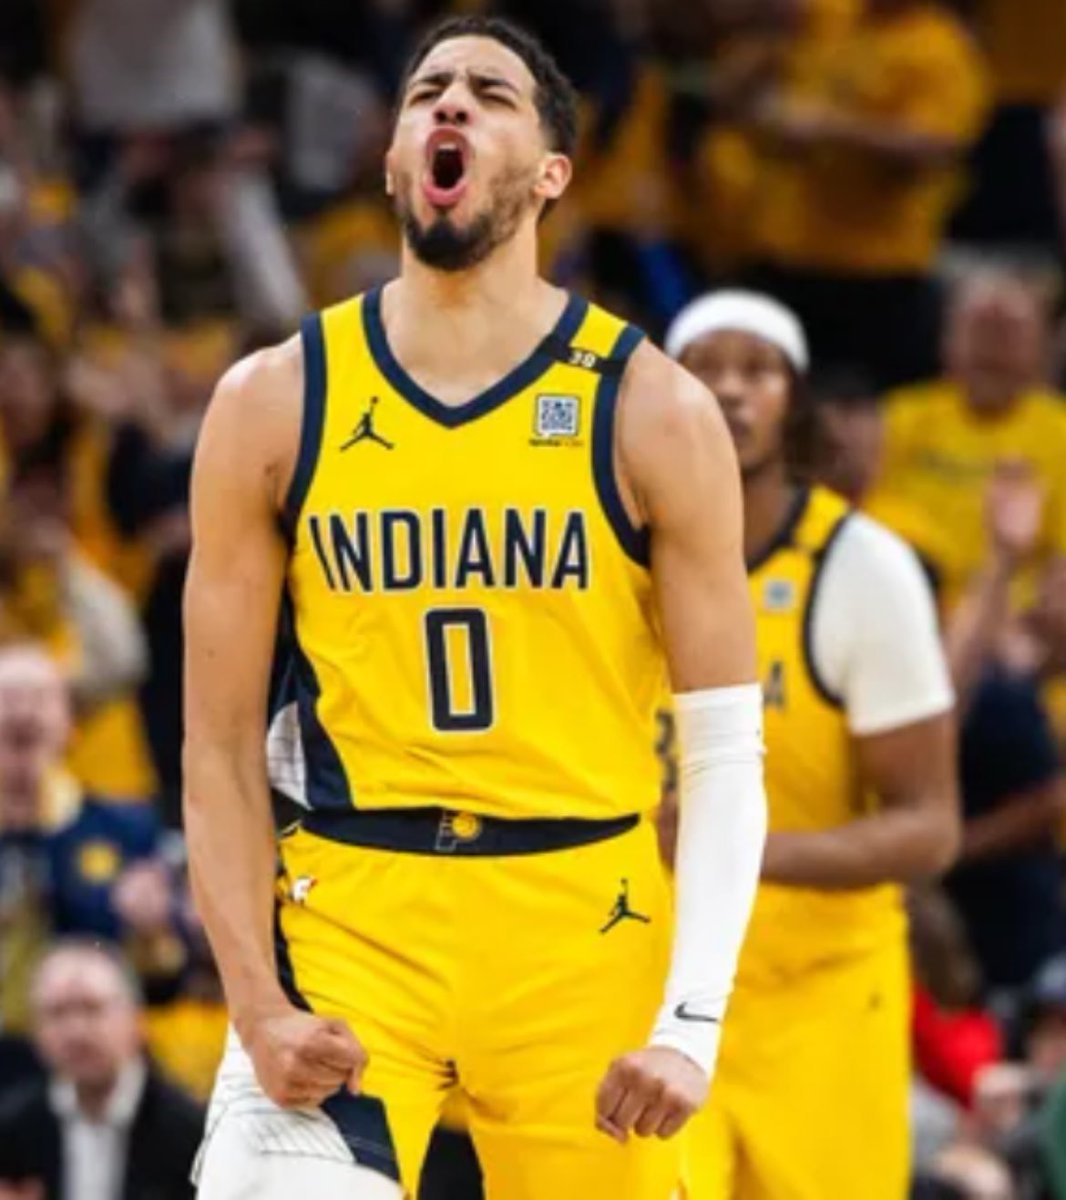 The Indiana Pacers have defeated the Milwaukee Bucks (with no Giannis) in 6 games and advance past the first round for the first time since 2014. They’ll either face the New York Knicks or the Philadelphia 76ers in the second round.